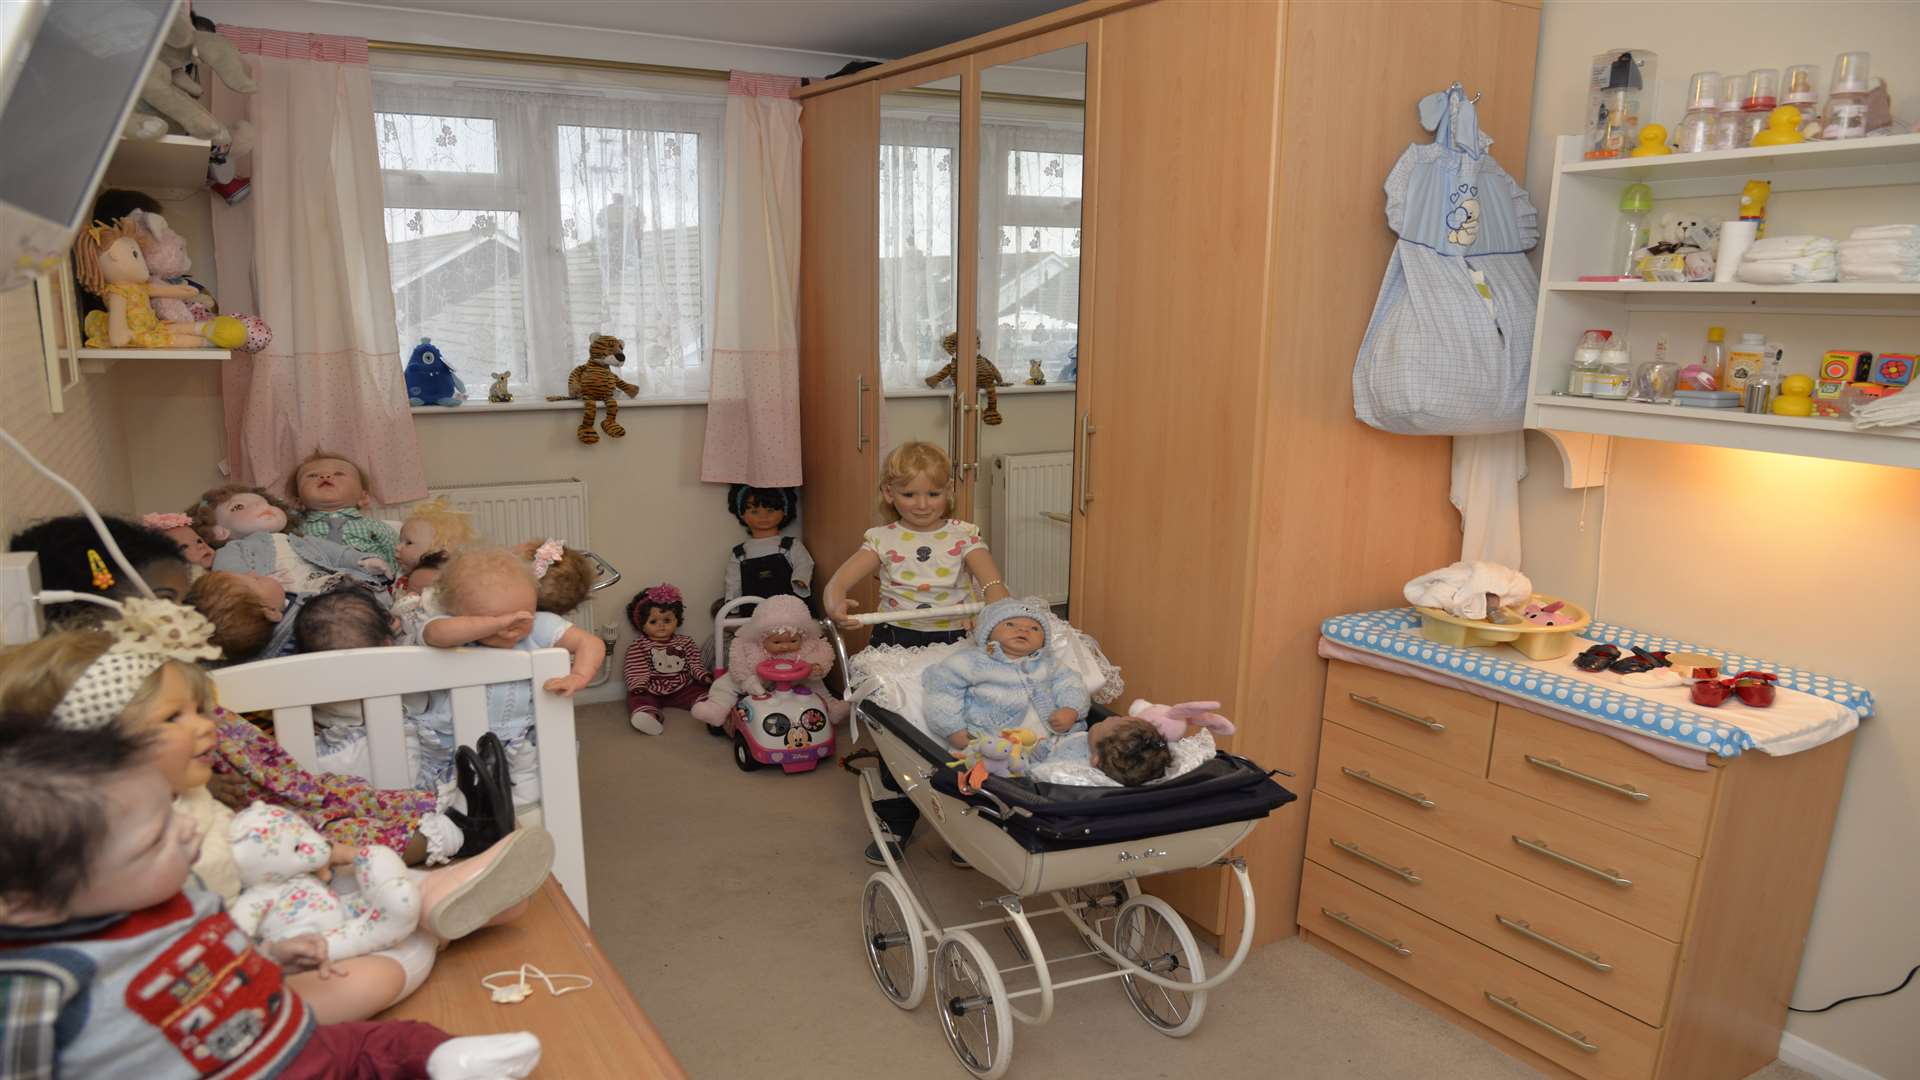 The reborn dolls live in a nursery in Christine's house